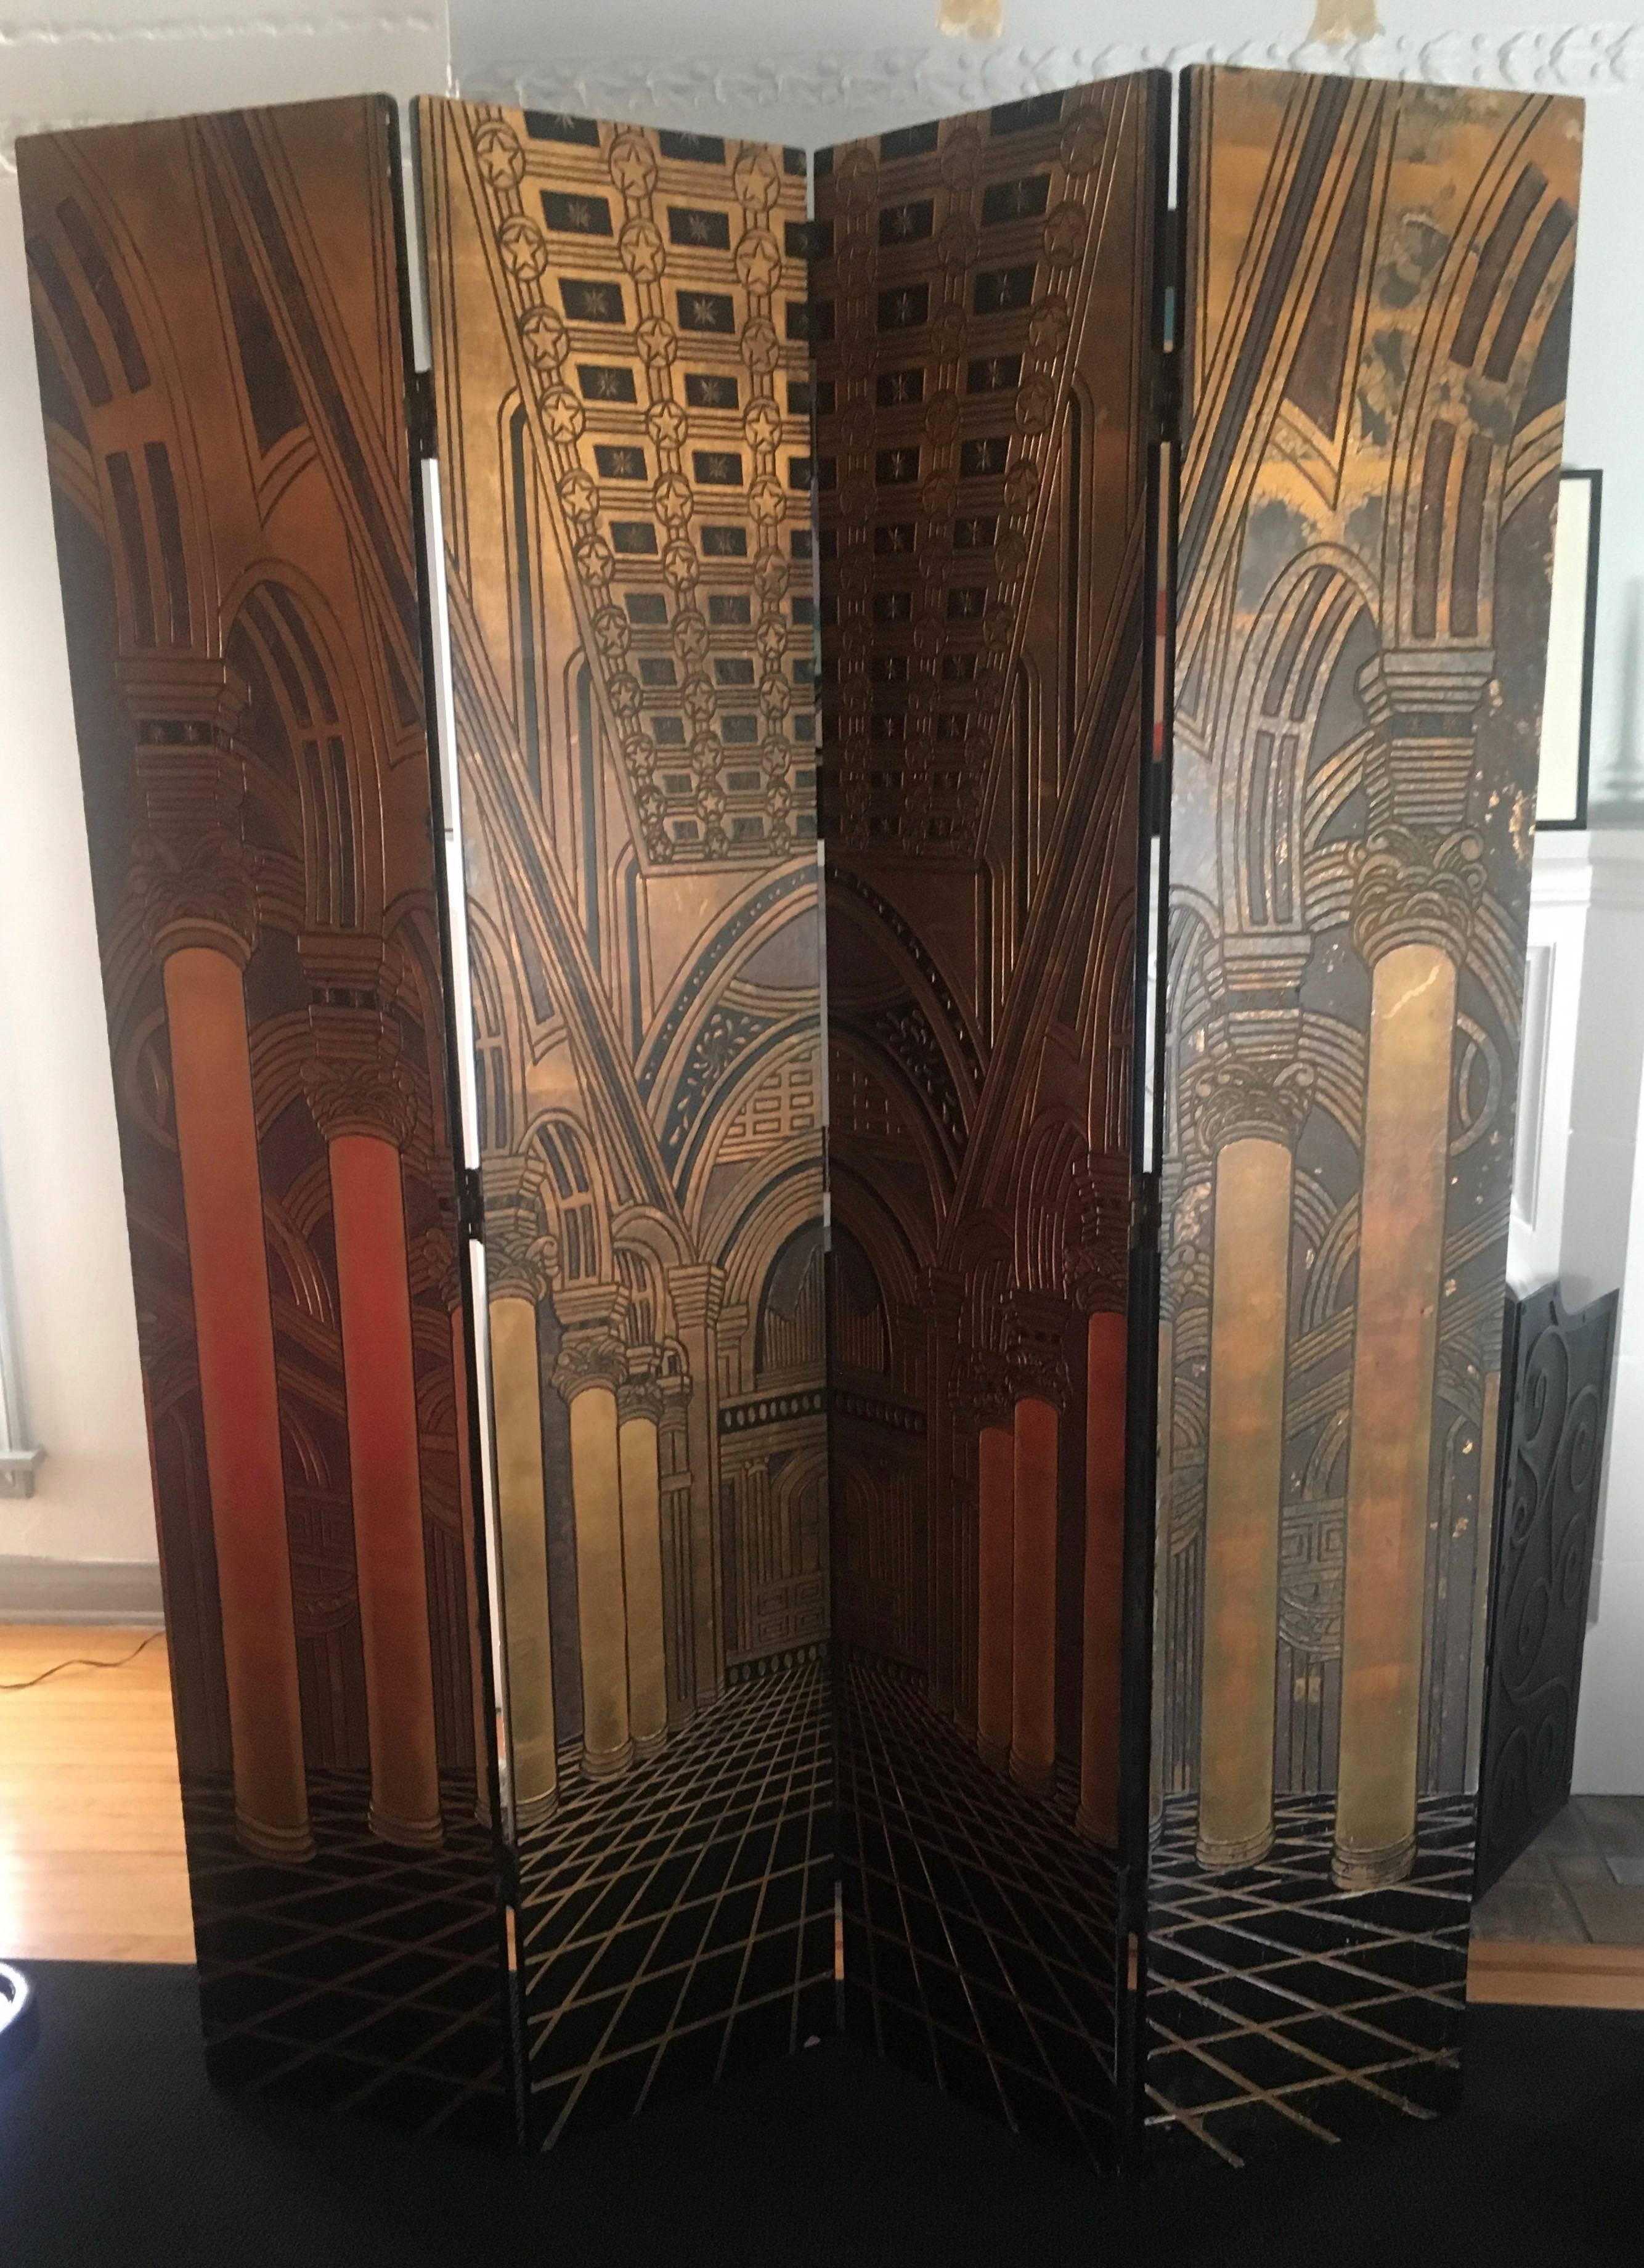 Four panel screen in carved architectural giltwood deco scene. Back of screen is black with routed red, green and yellow lines around perimeter.

Screen has a very dynamic presence, very tall with a grand presence.

The forced perspective neoclassic